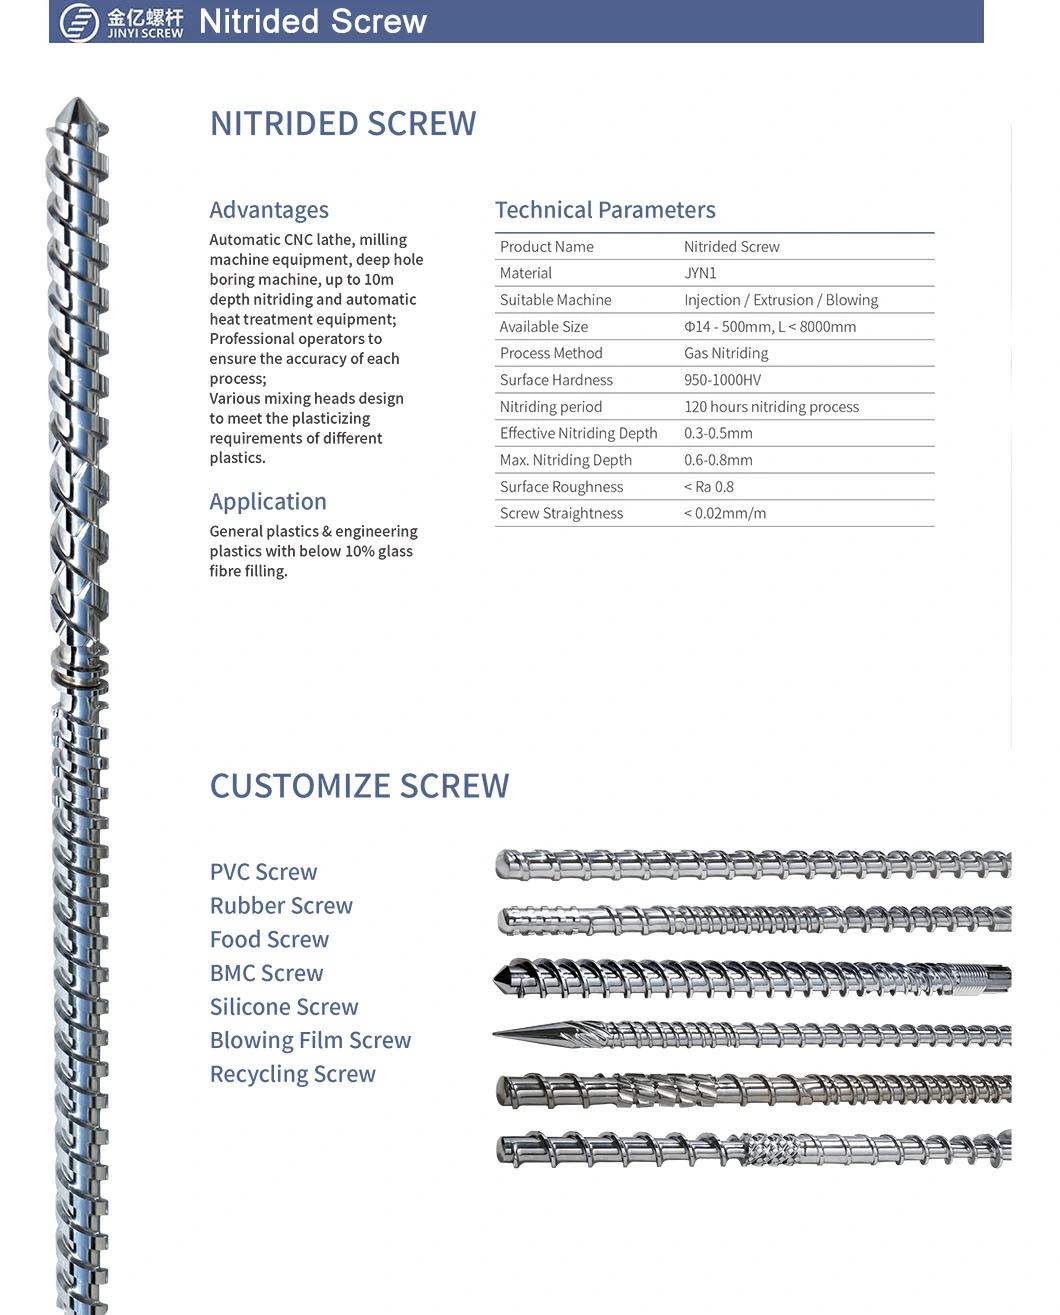 Nitrided Screw and Barrel for Engineering Plastics with Less Than 10% Glass Fiber or Filler